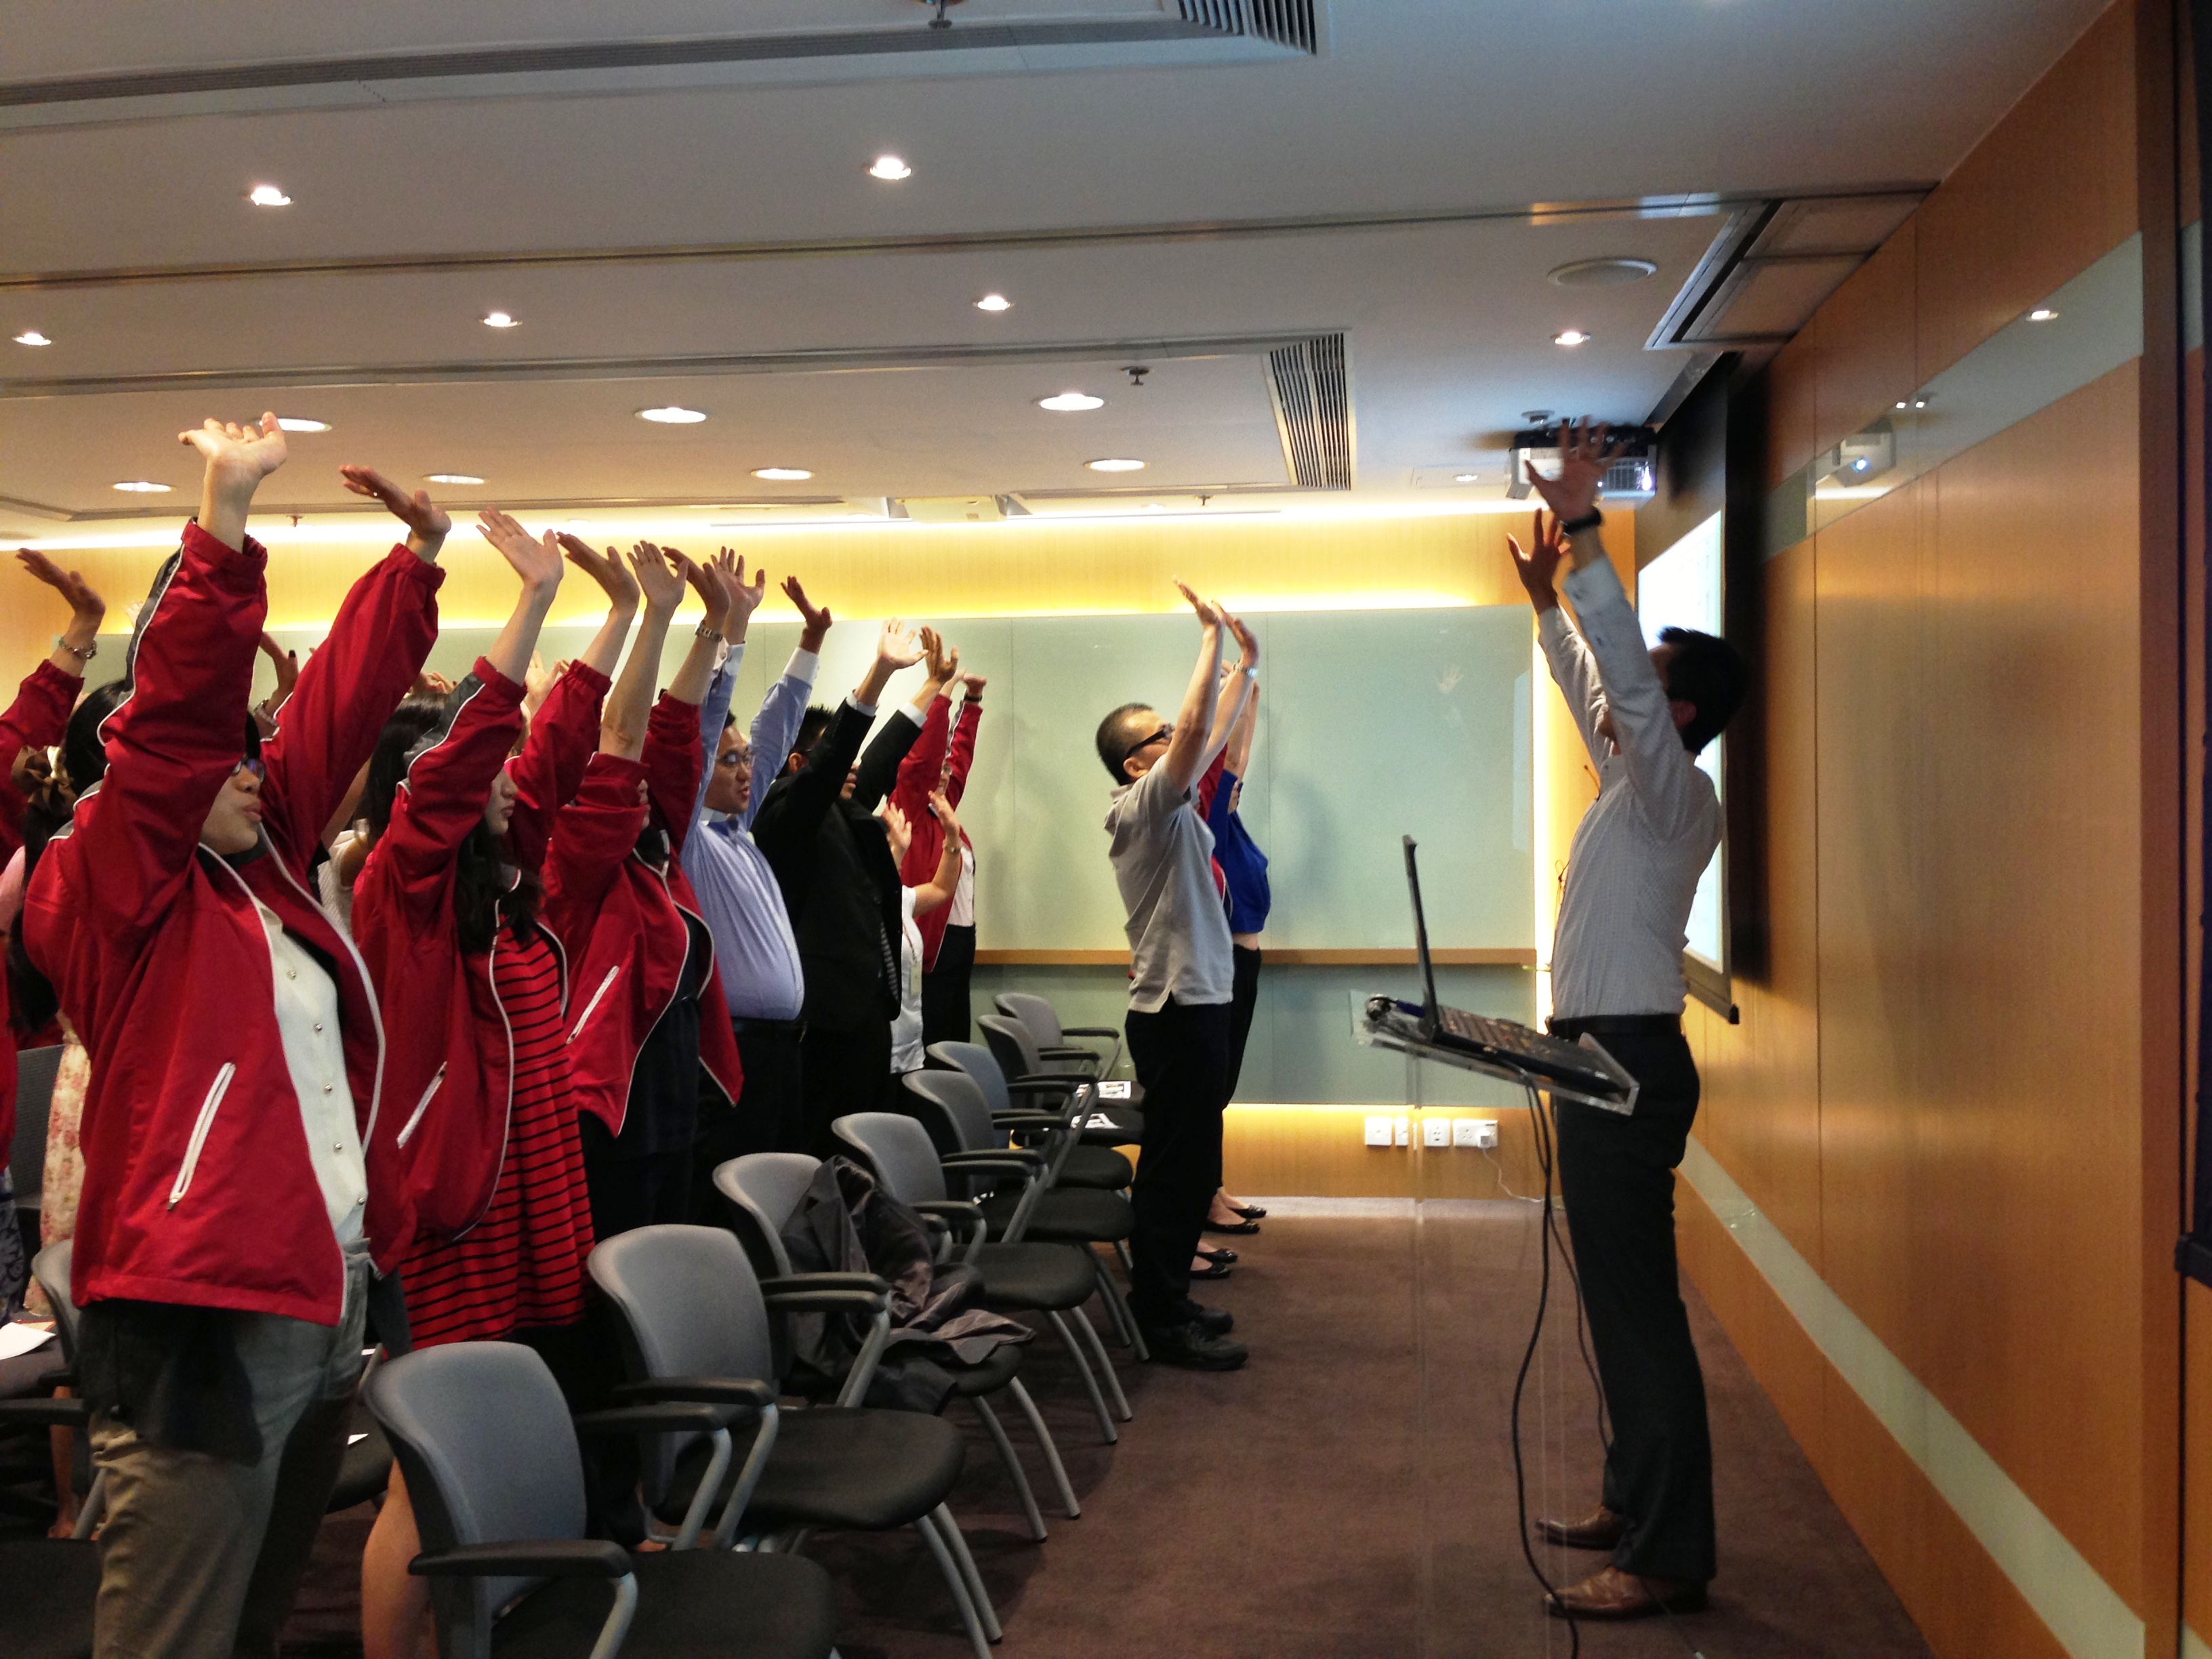 ONC Lawyers held an in-house seminar on office ergonomics and work-related musculoskeletal disorders